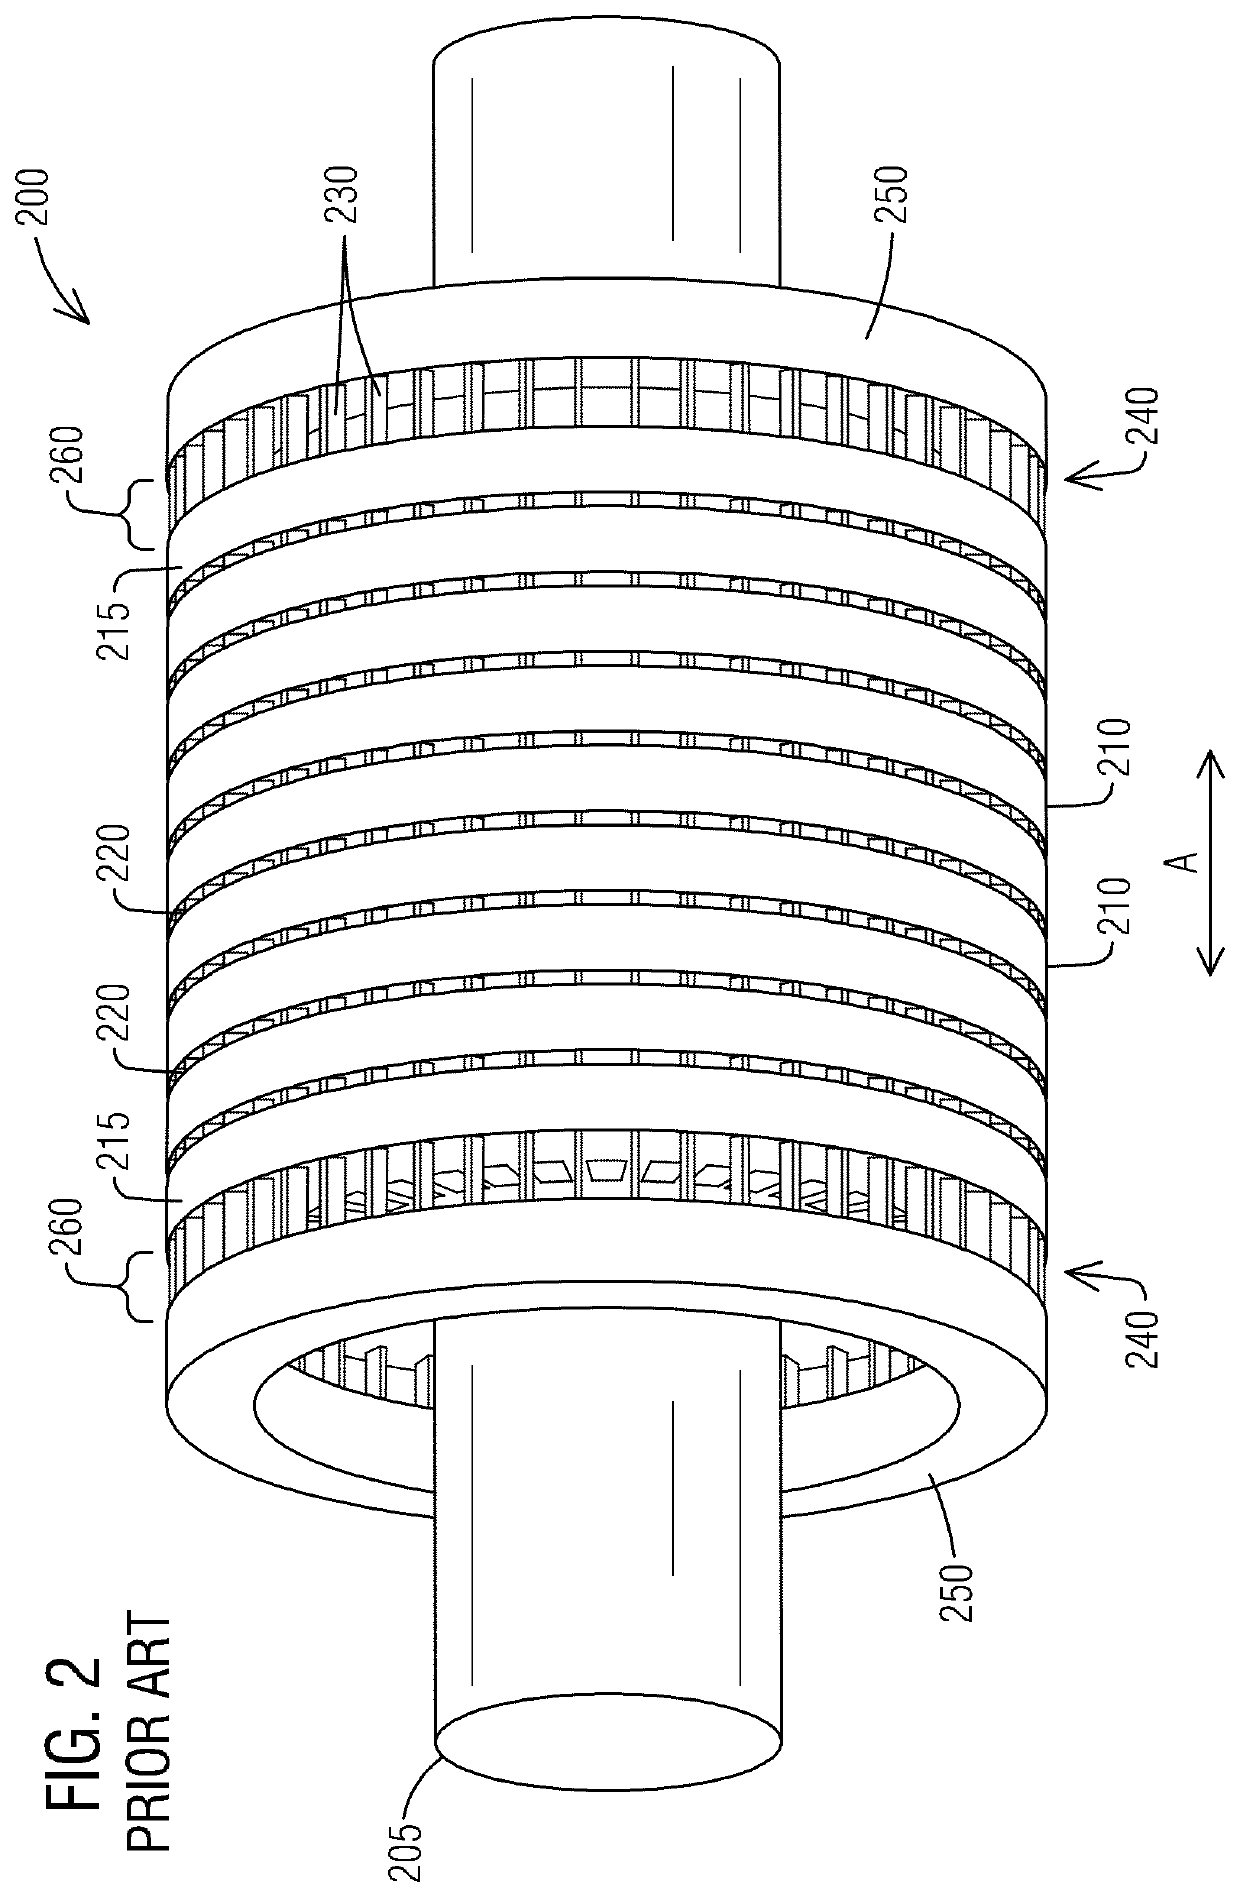 Rotor assembly for an electrodynamic machine that minimizes mechanical stresses in cooling ducts